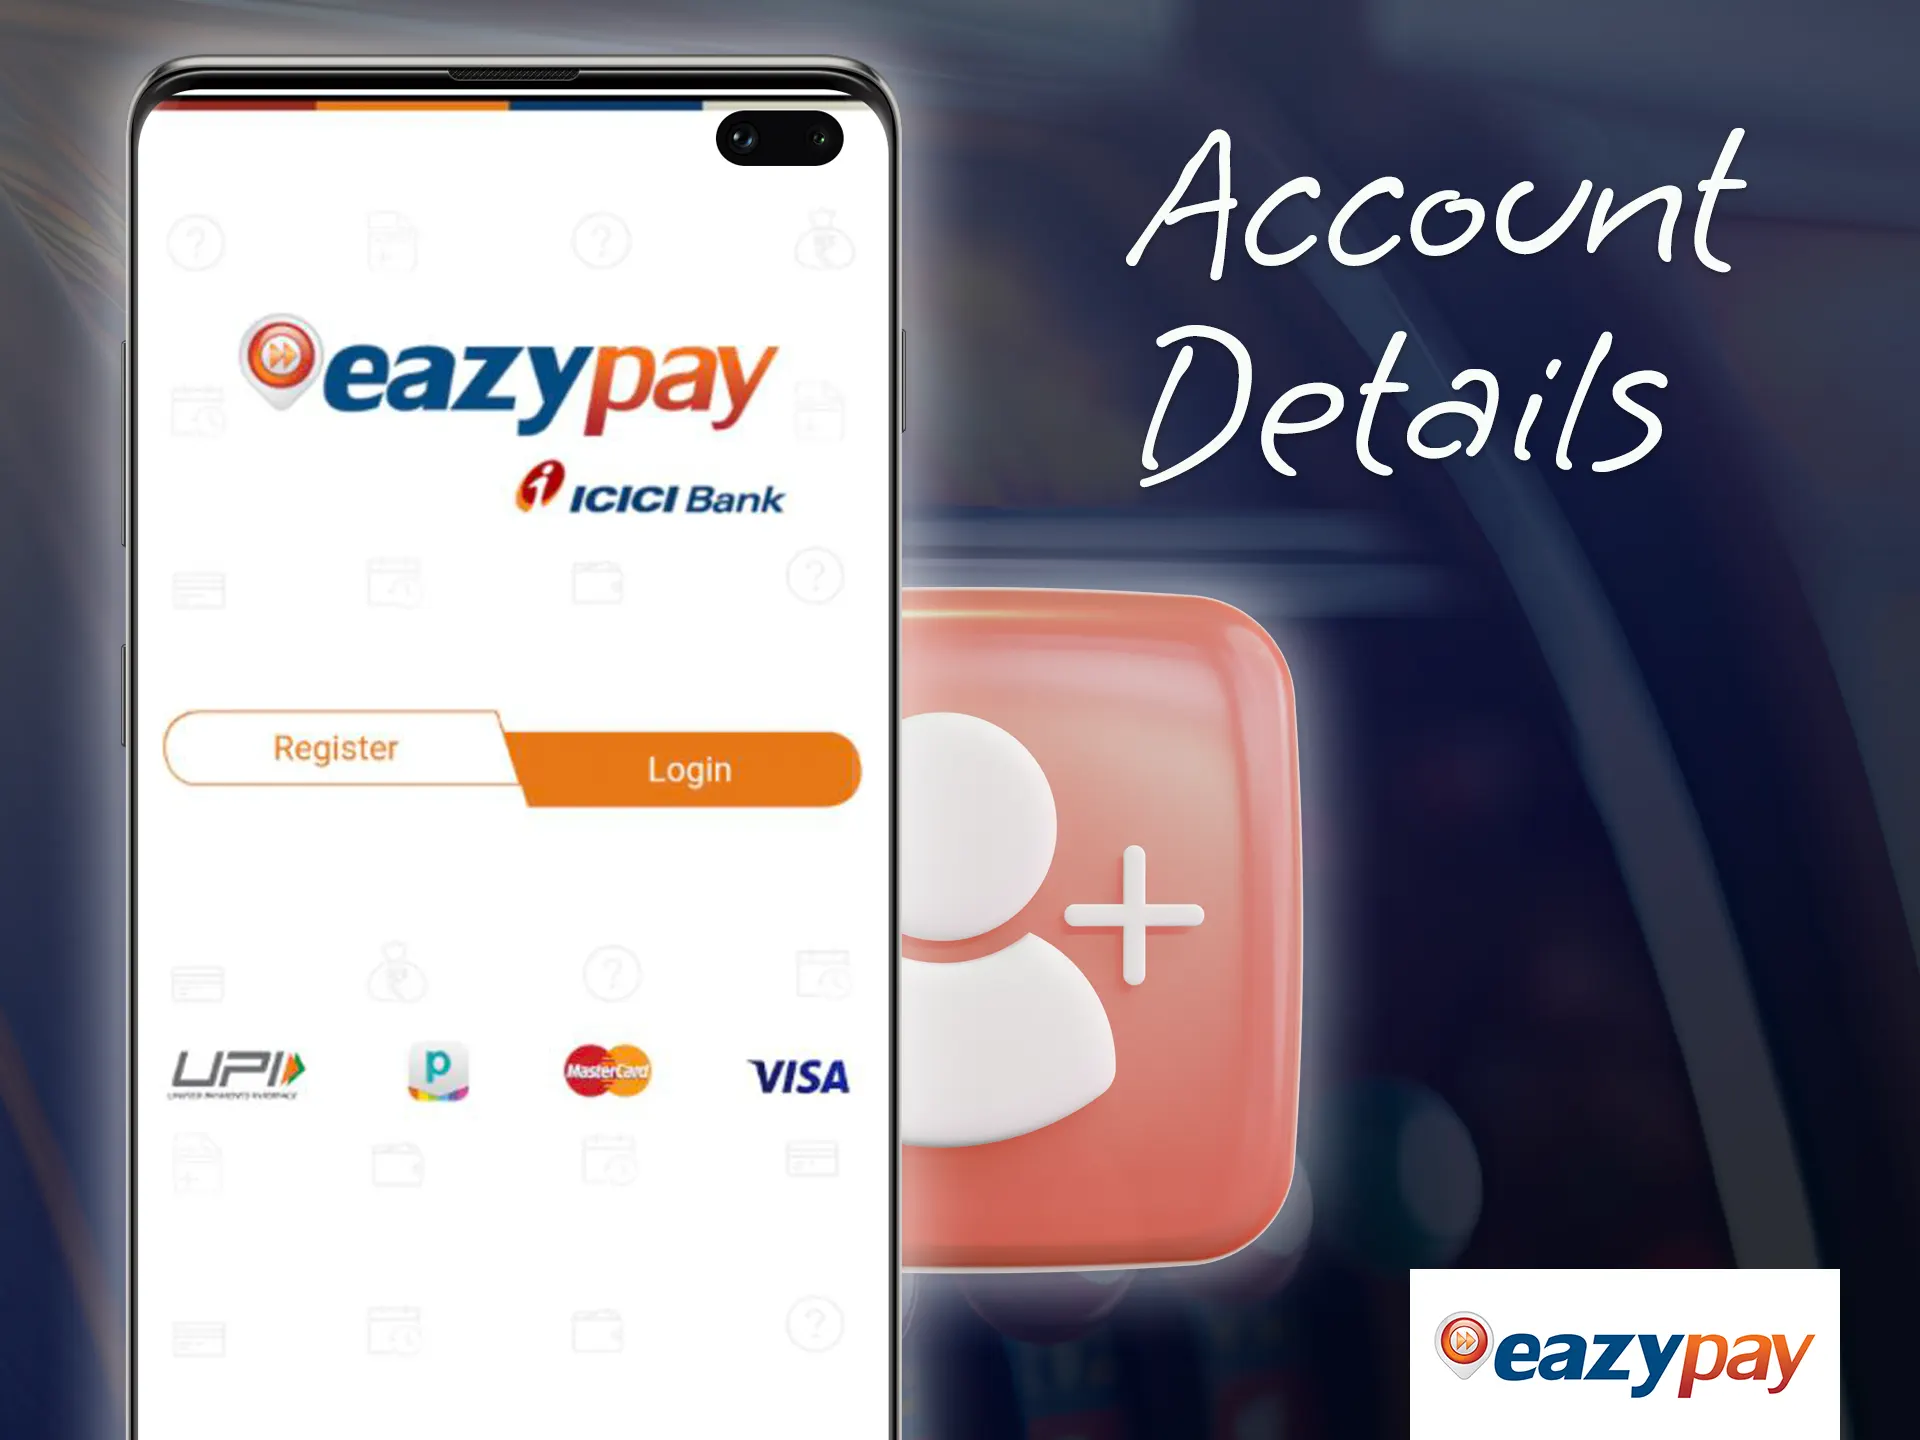 Register an EazyPay account.